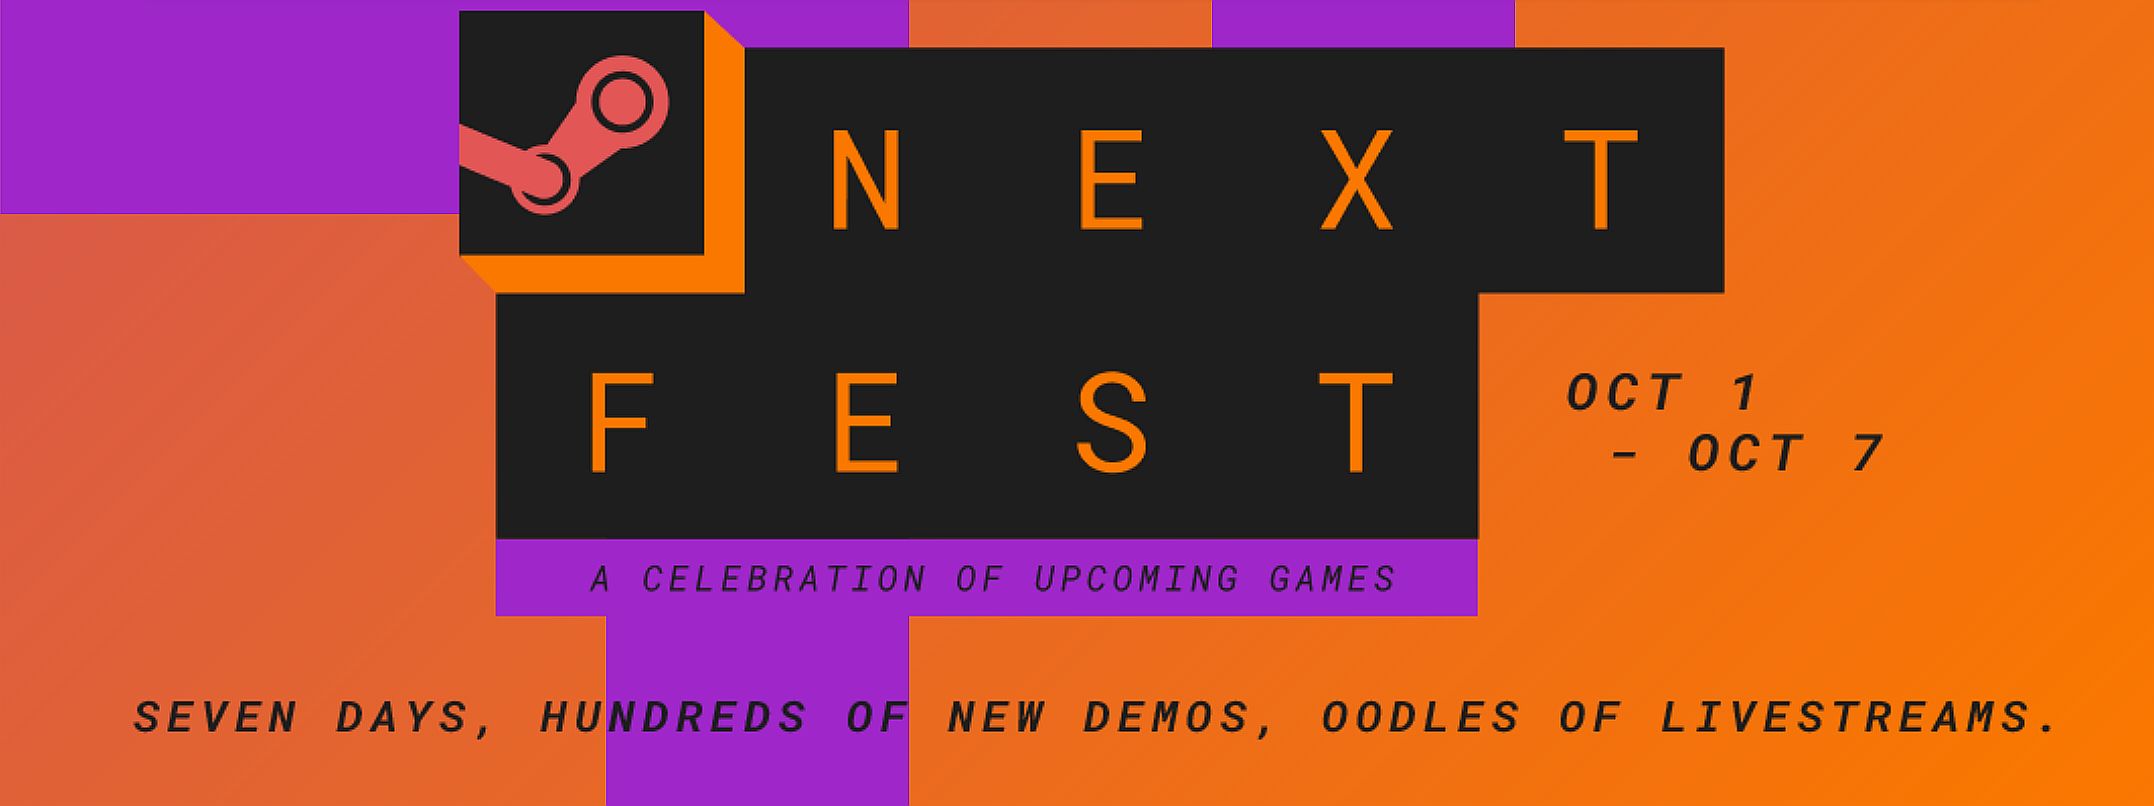 Image for Steam Next Fest: October Edition - here's just sampling of the demos available